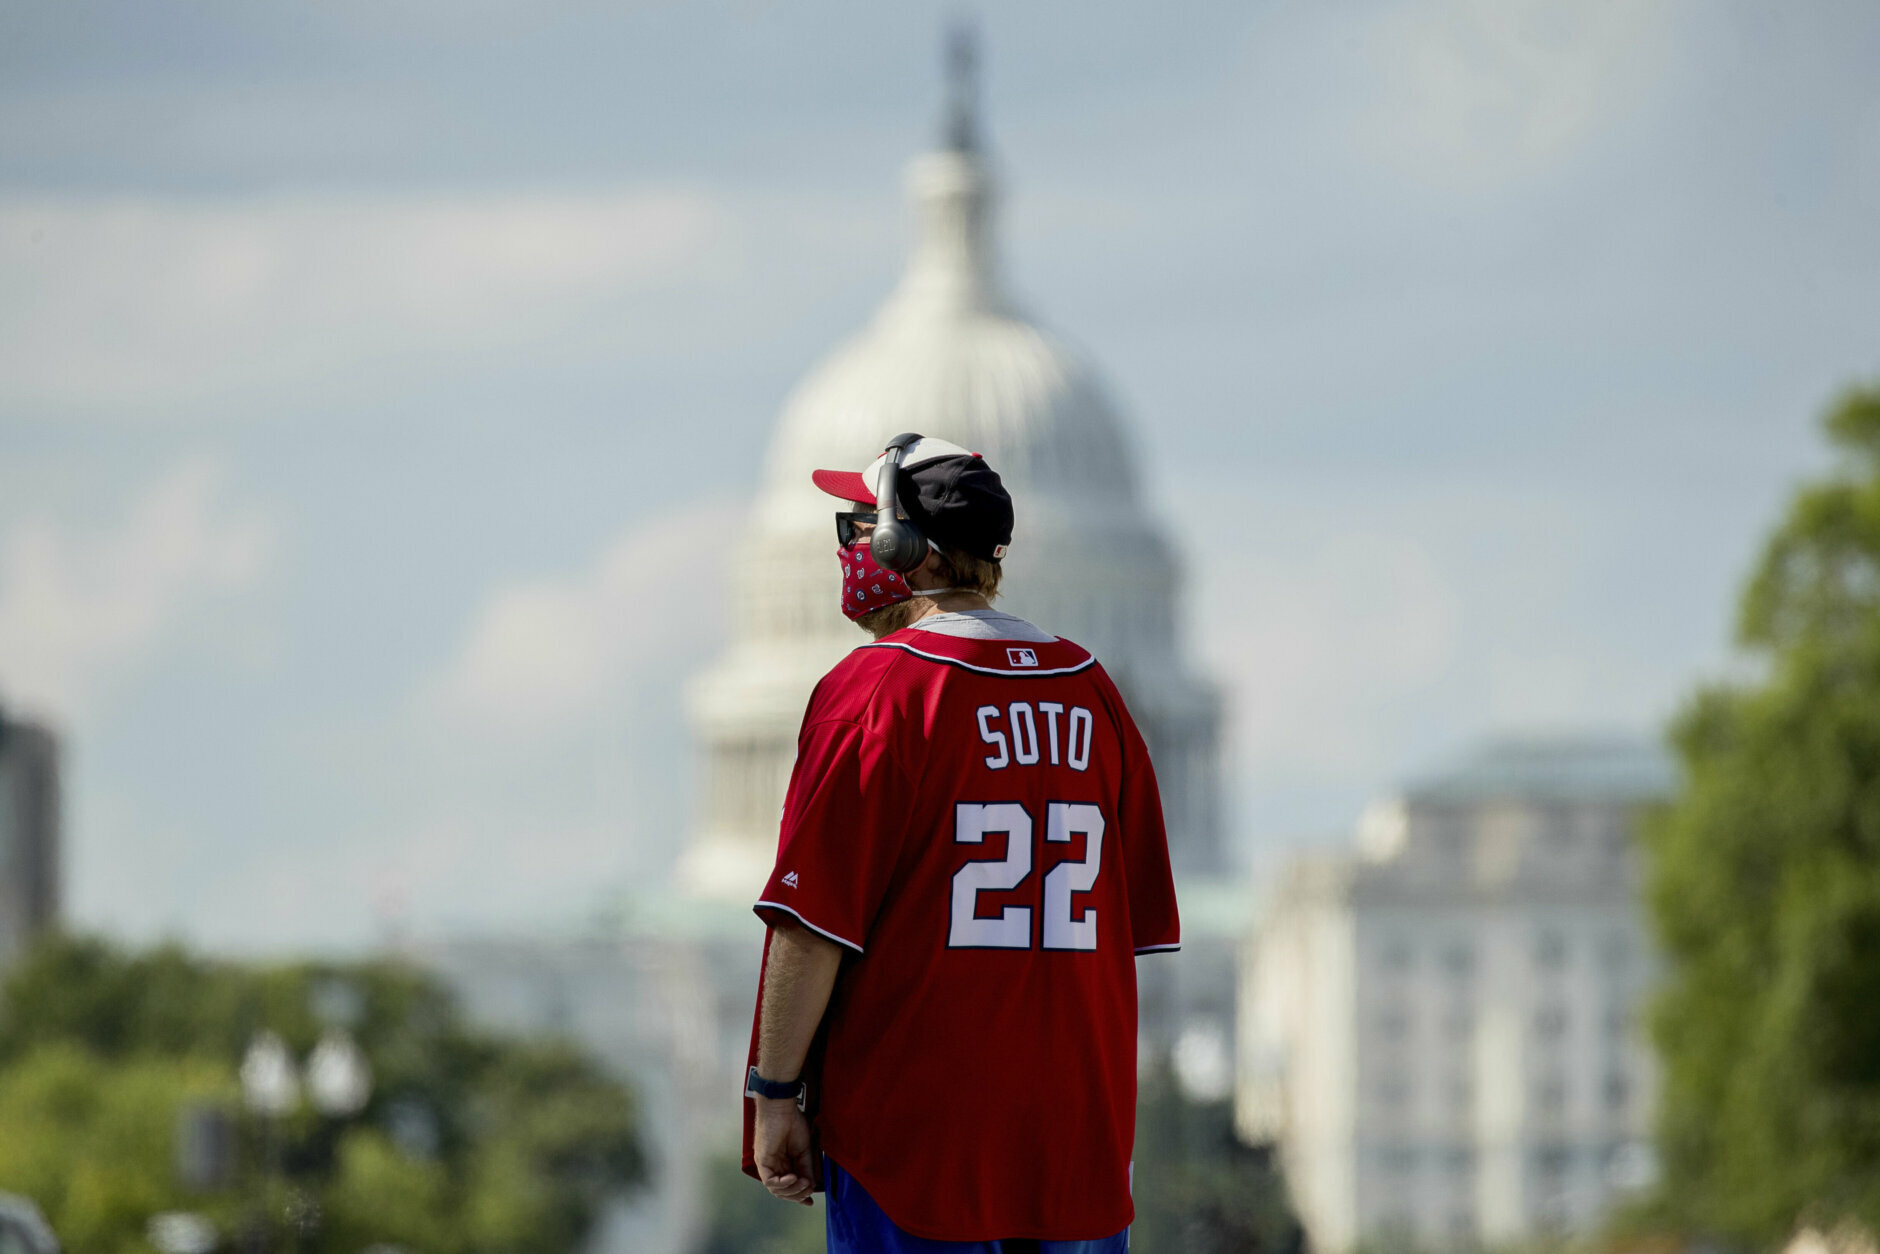 Fight resumes: Nationals finally open 2020 season - WTOP News